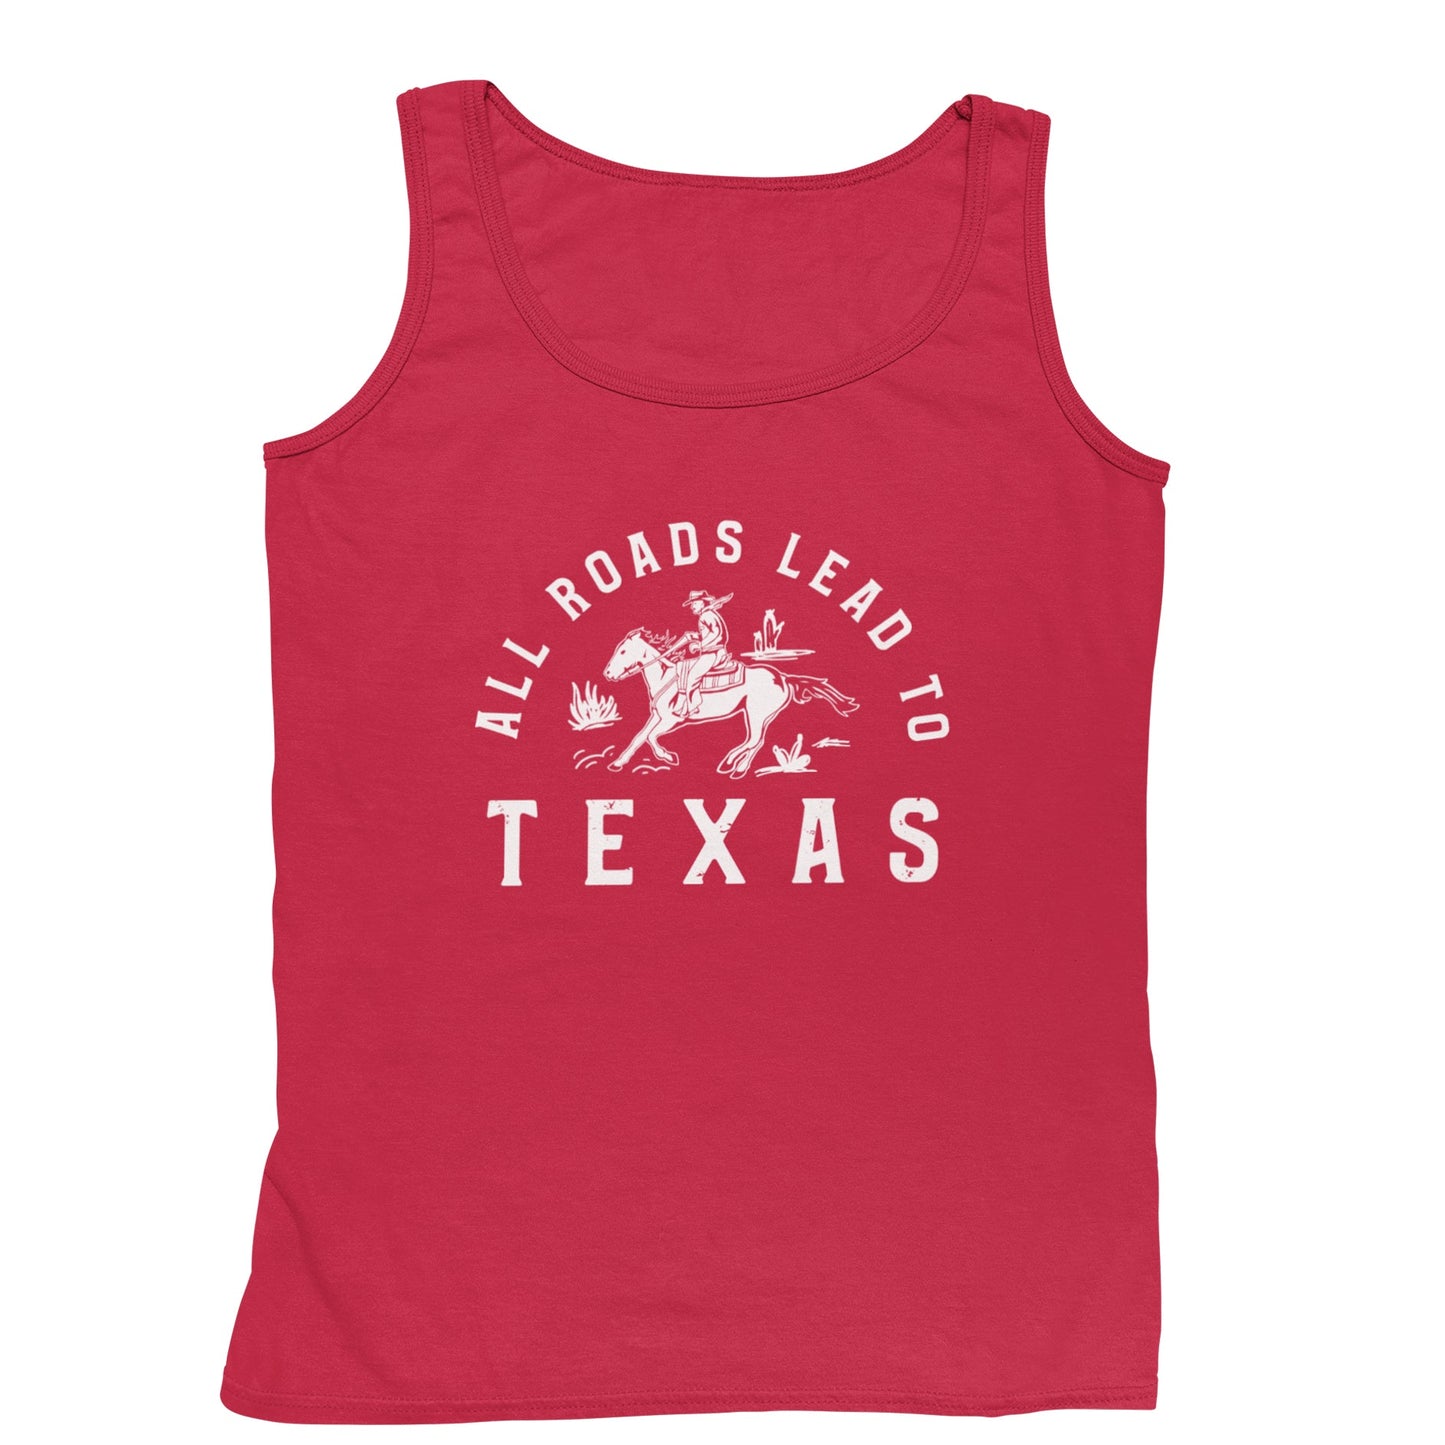 All Roads Lead to Texas Tank